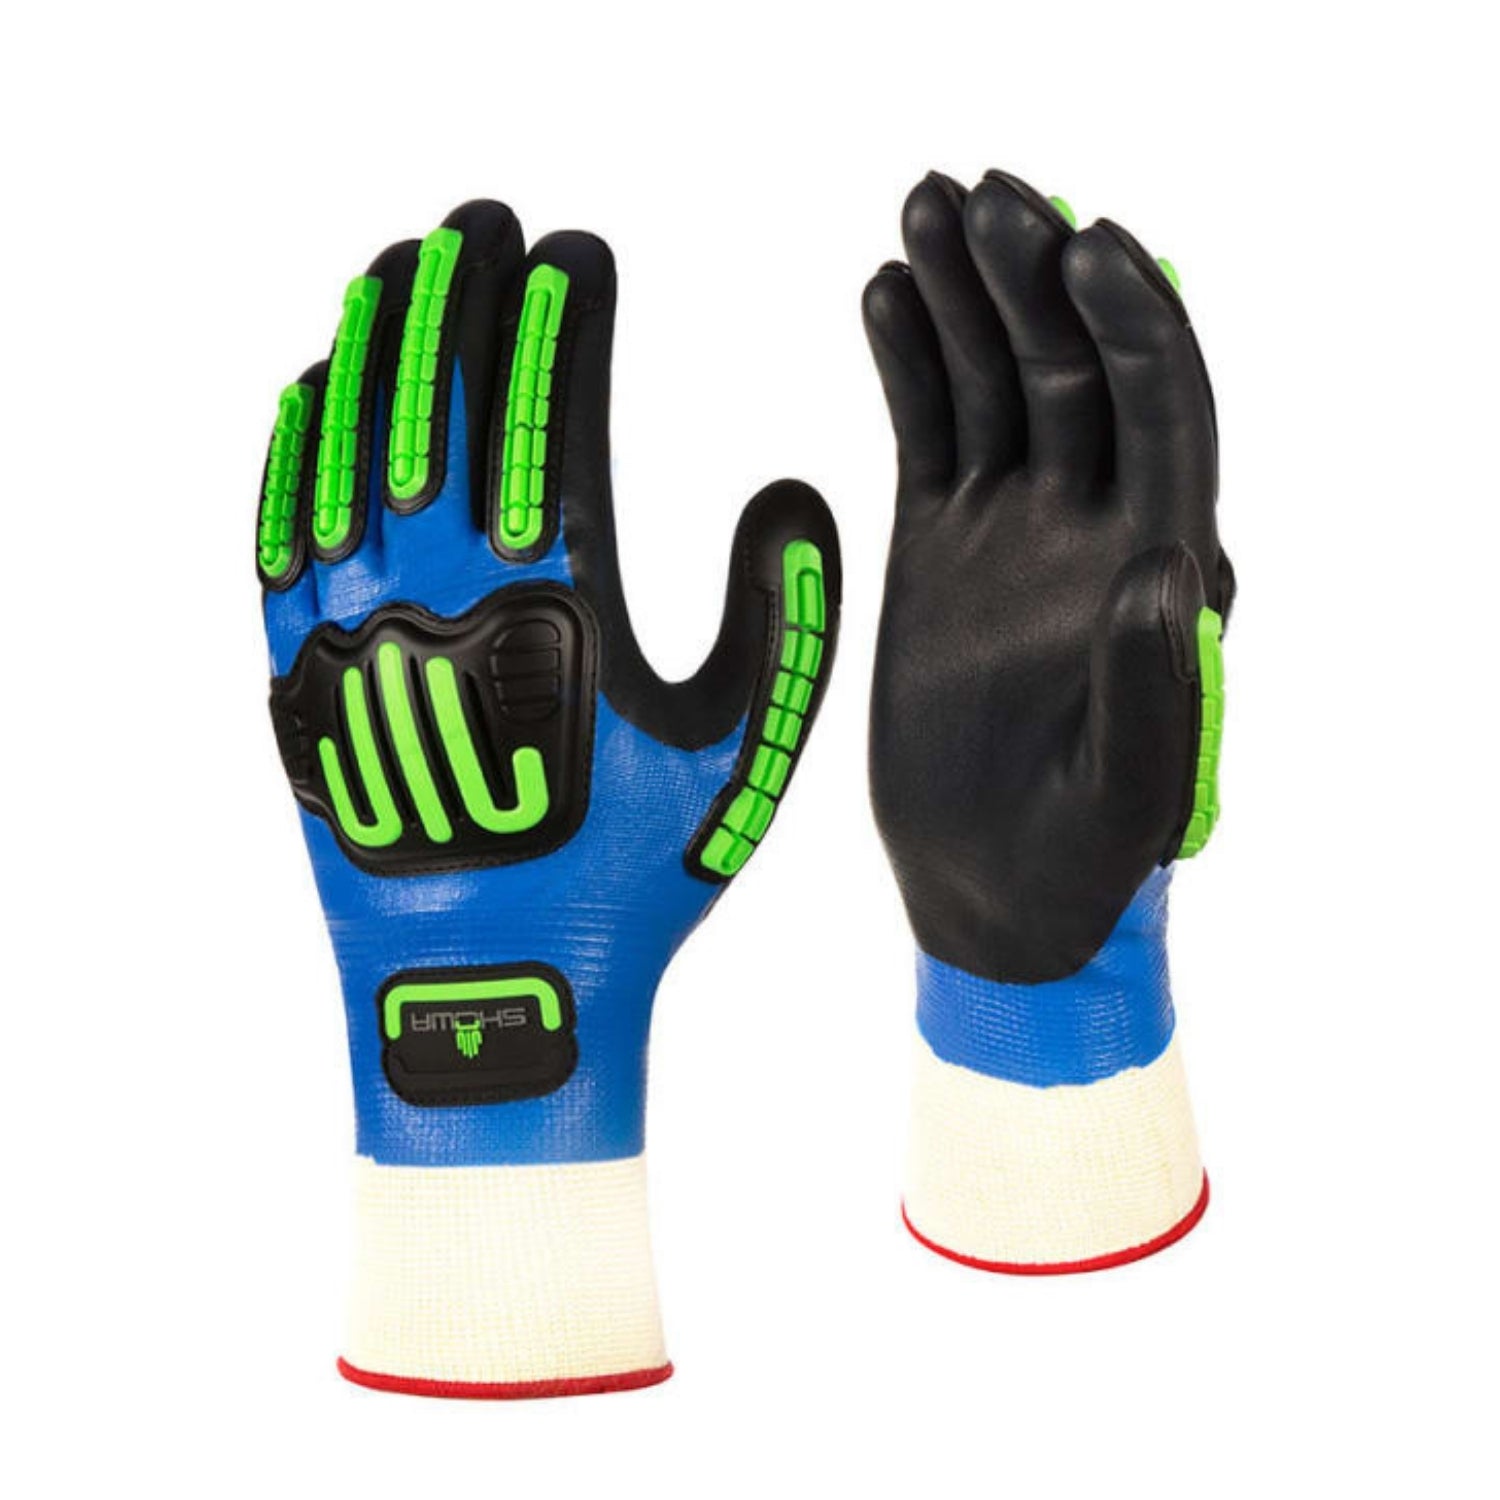 SHOWA 377-IP - Impact Protection Gloves